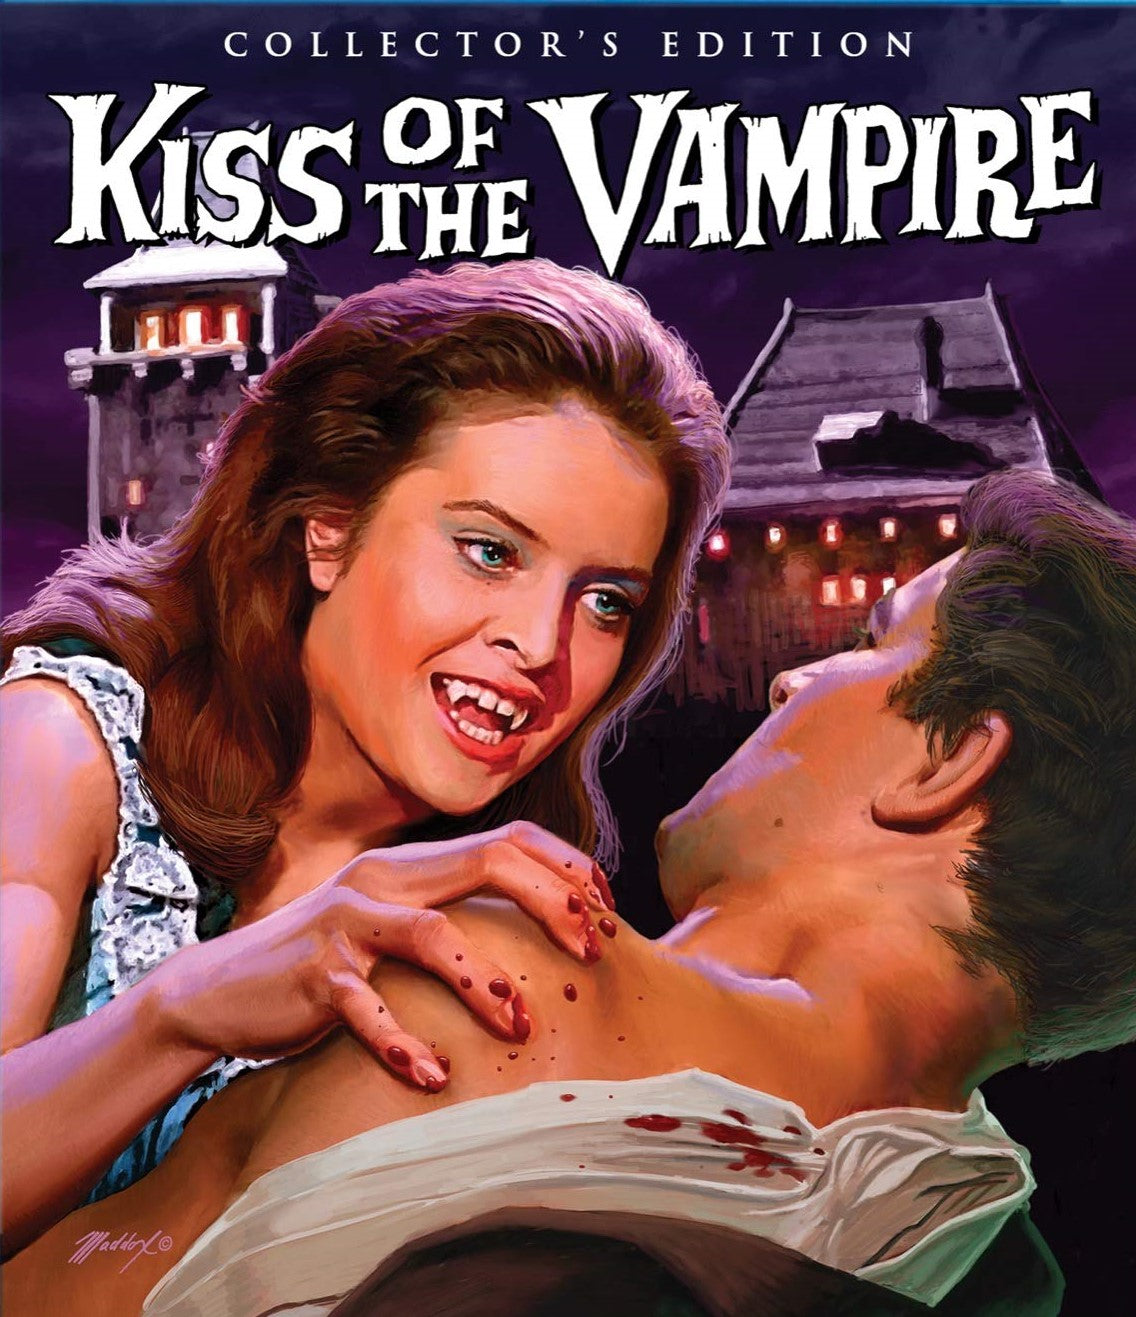 Kiss Of The Vampire (Collectors Edition) Blu-Ray Blu-Ray